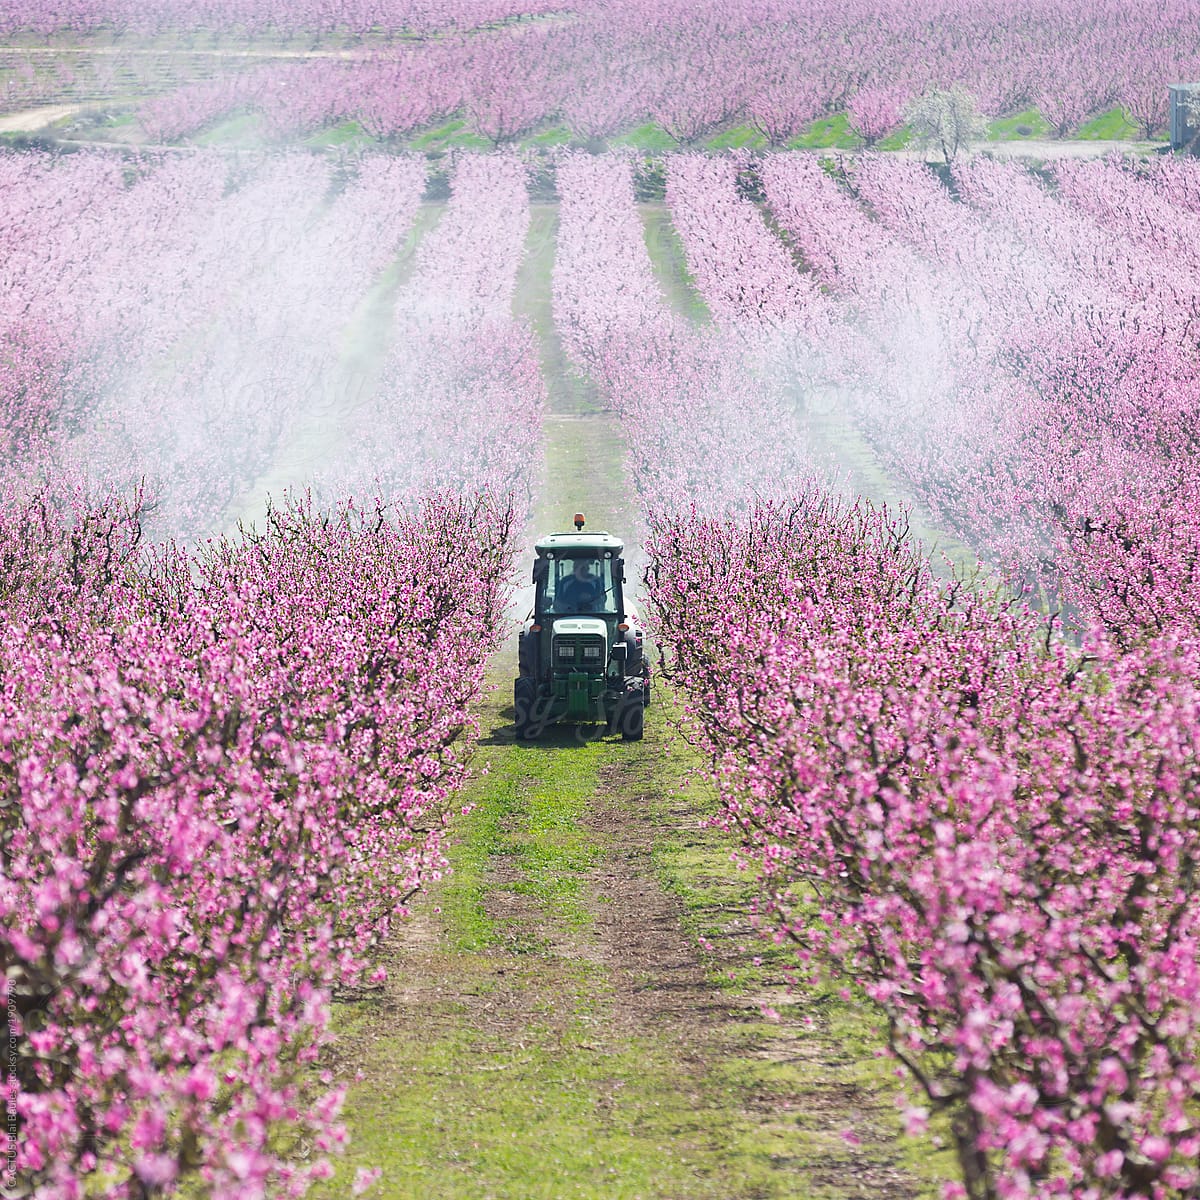 Tractor spraying a field in bloom with chemicals